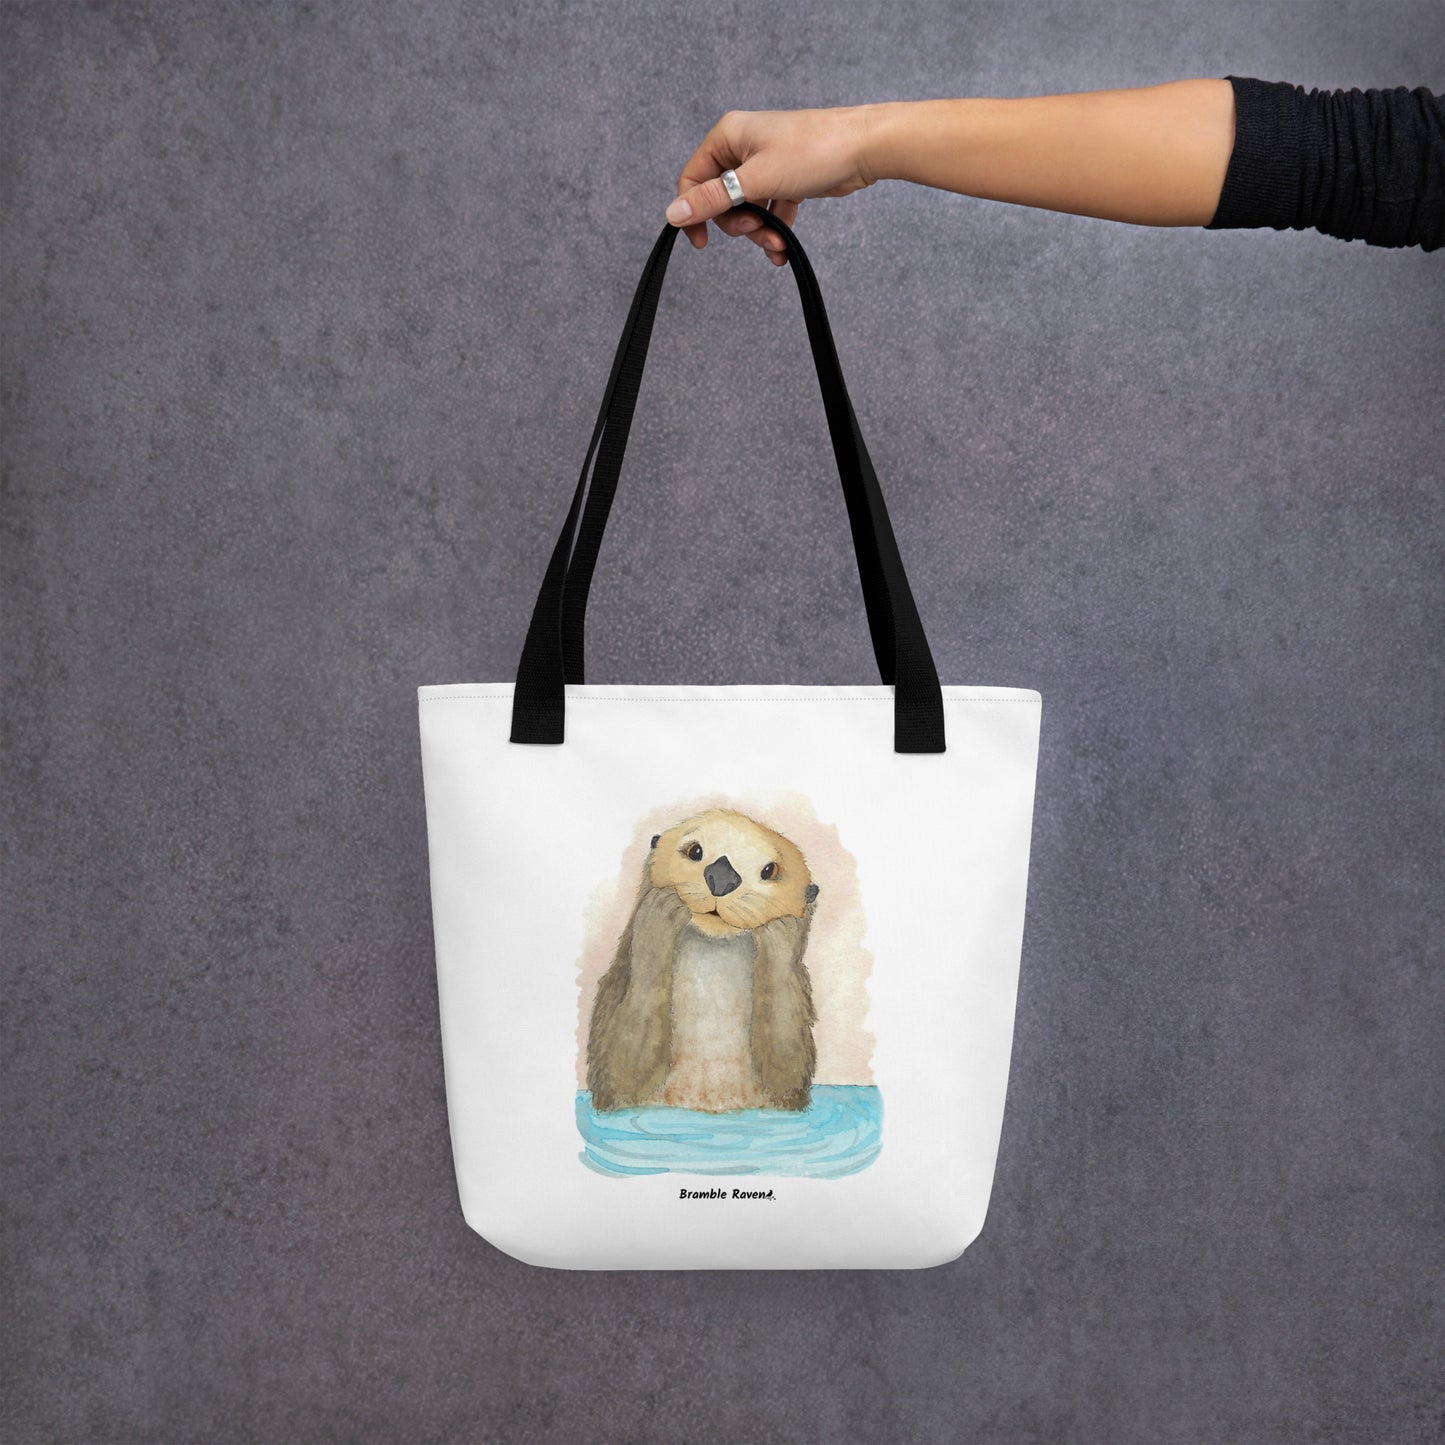 Otter Amazement sturdy tote bag. Measures 15" by 15" and can hold up to 44 lbs. Features watercolor sea otter painting printed on front and back. Has black handles. Shown hanging from a model's hand.